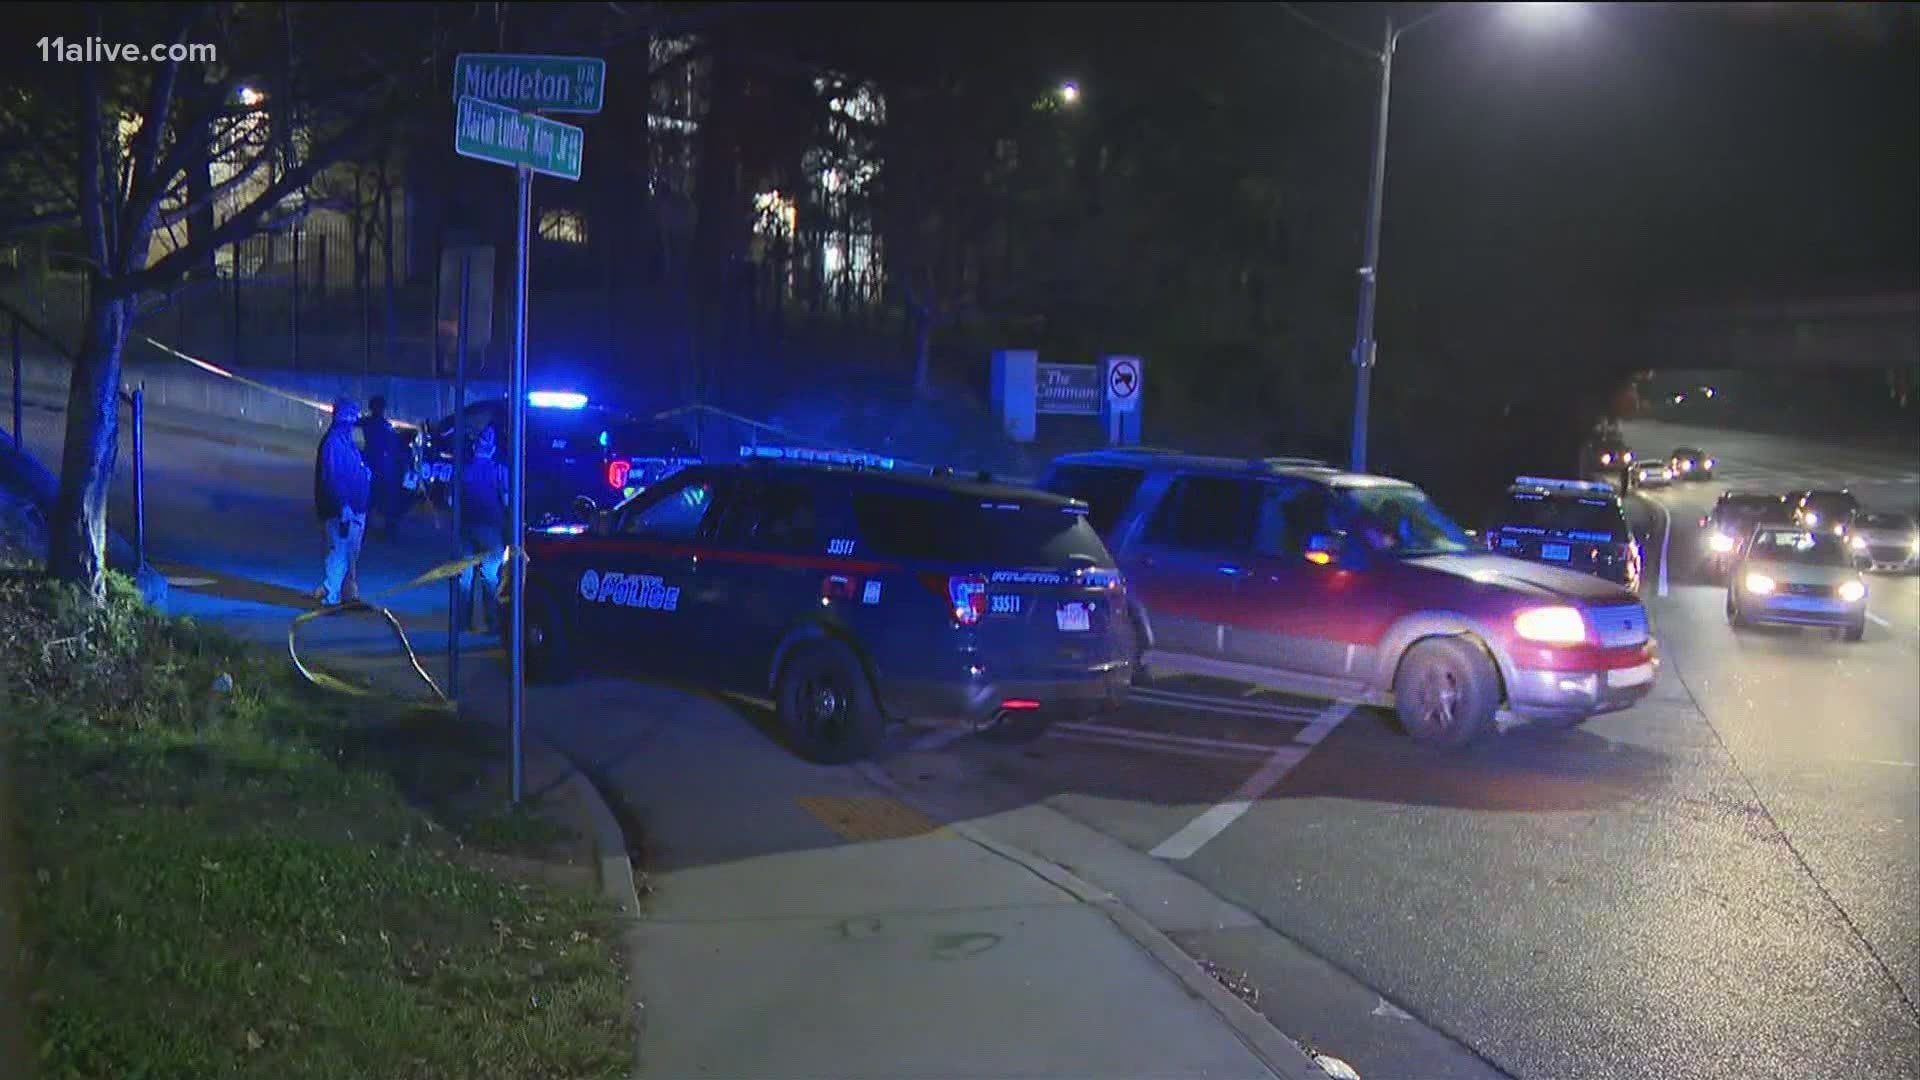 A 17-year-old girl has been hospitalized after she was shot in the back, according to police.  It happened in the 3100 block of Middleton Road NW in Atlanta.